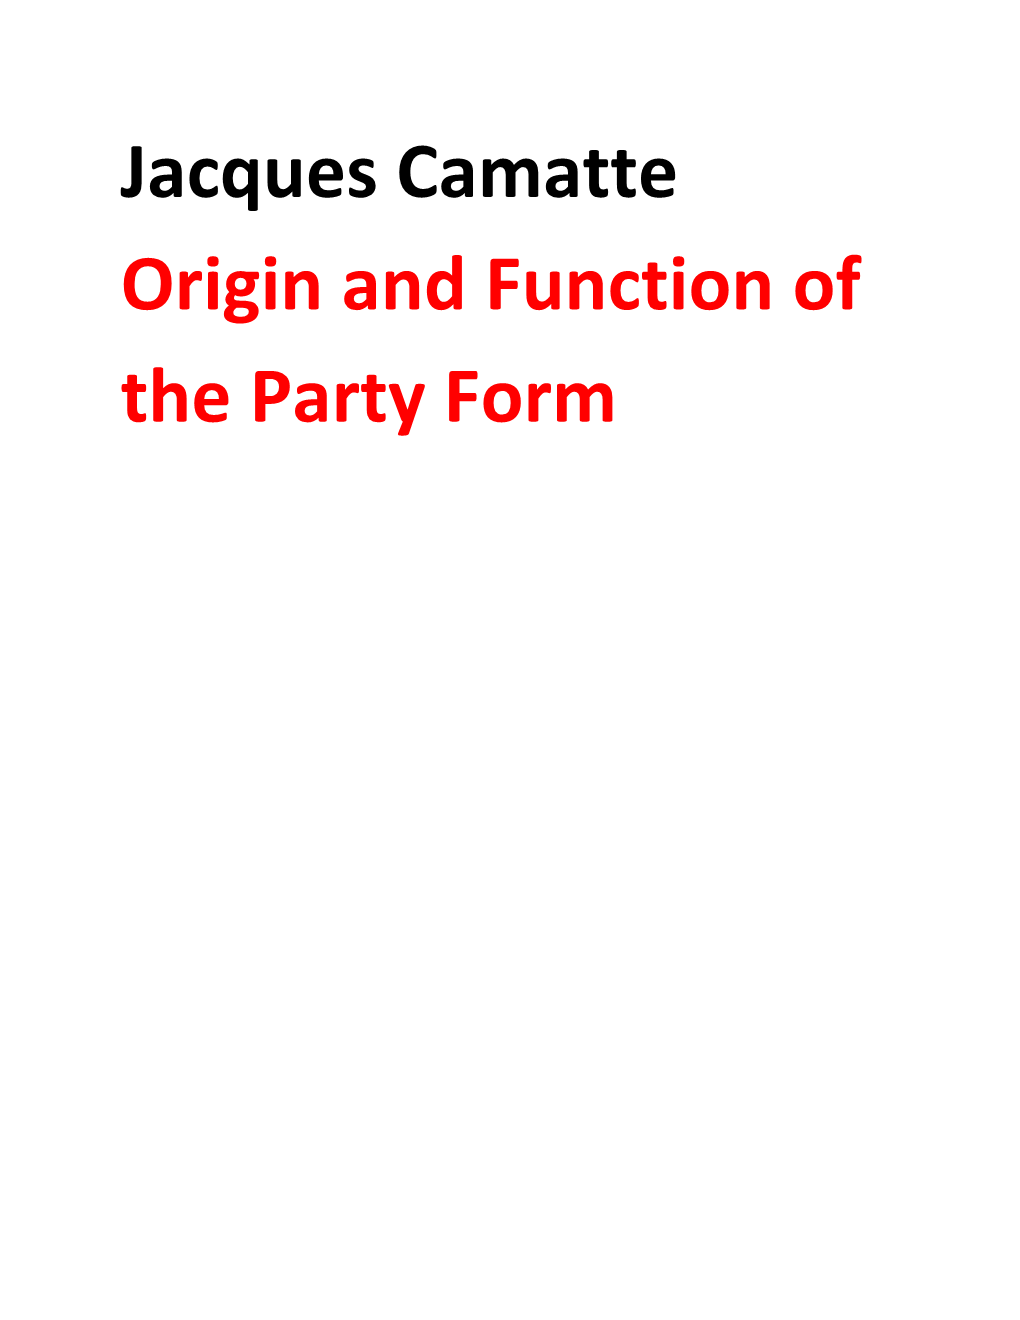 Jacques Camatte Origin and Function of the Party Form